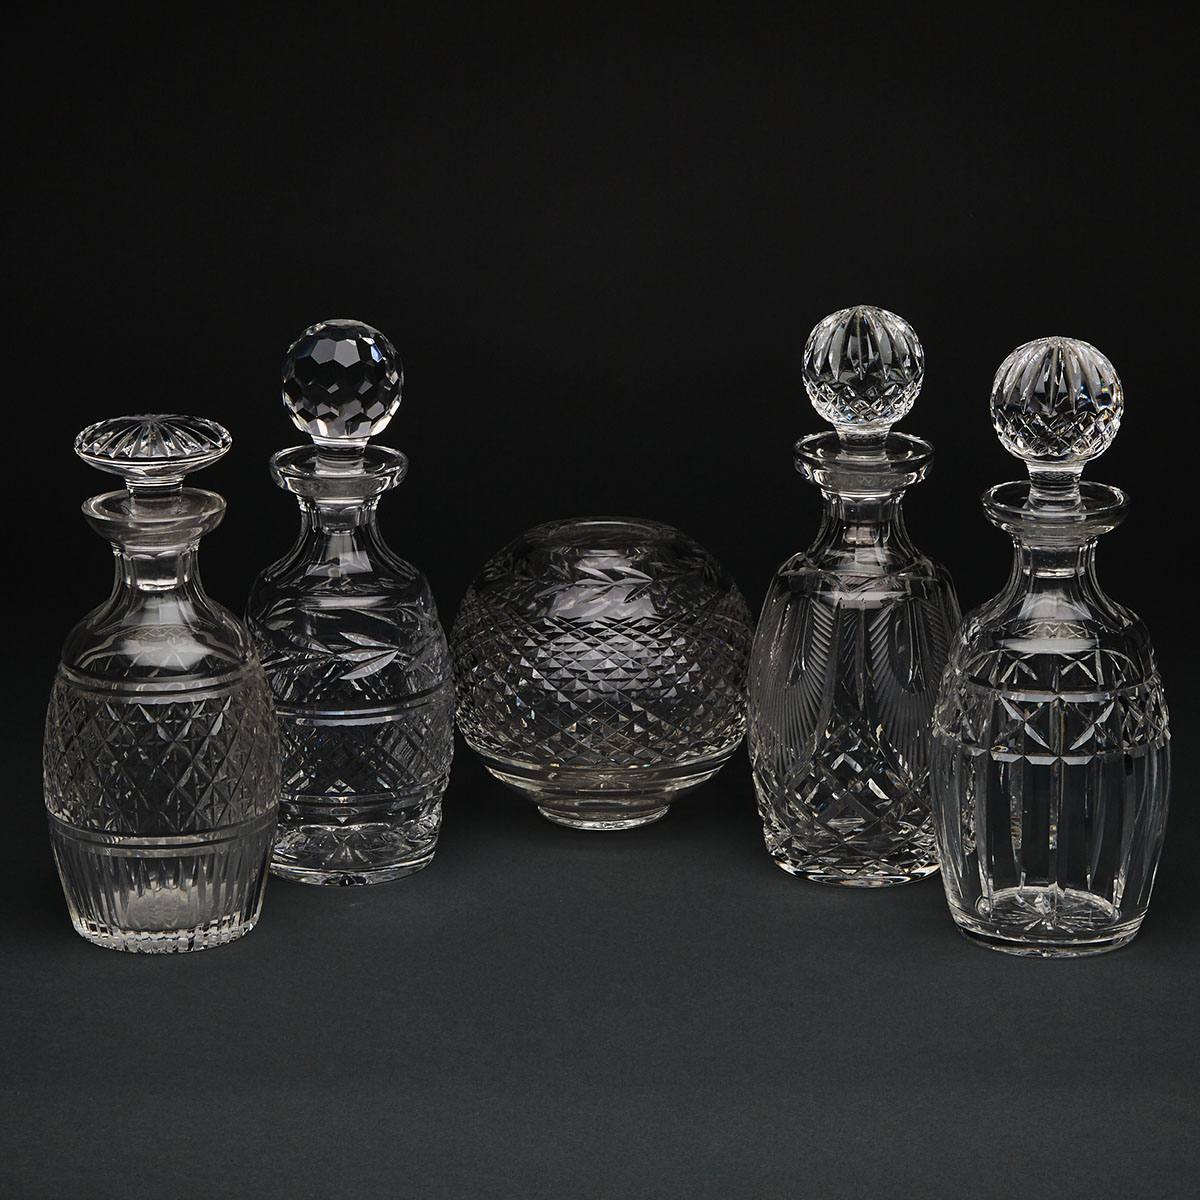 Four Waterford Cut Glass Decanters and a Vase, 20th century